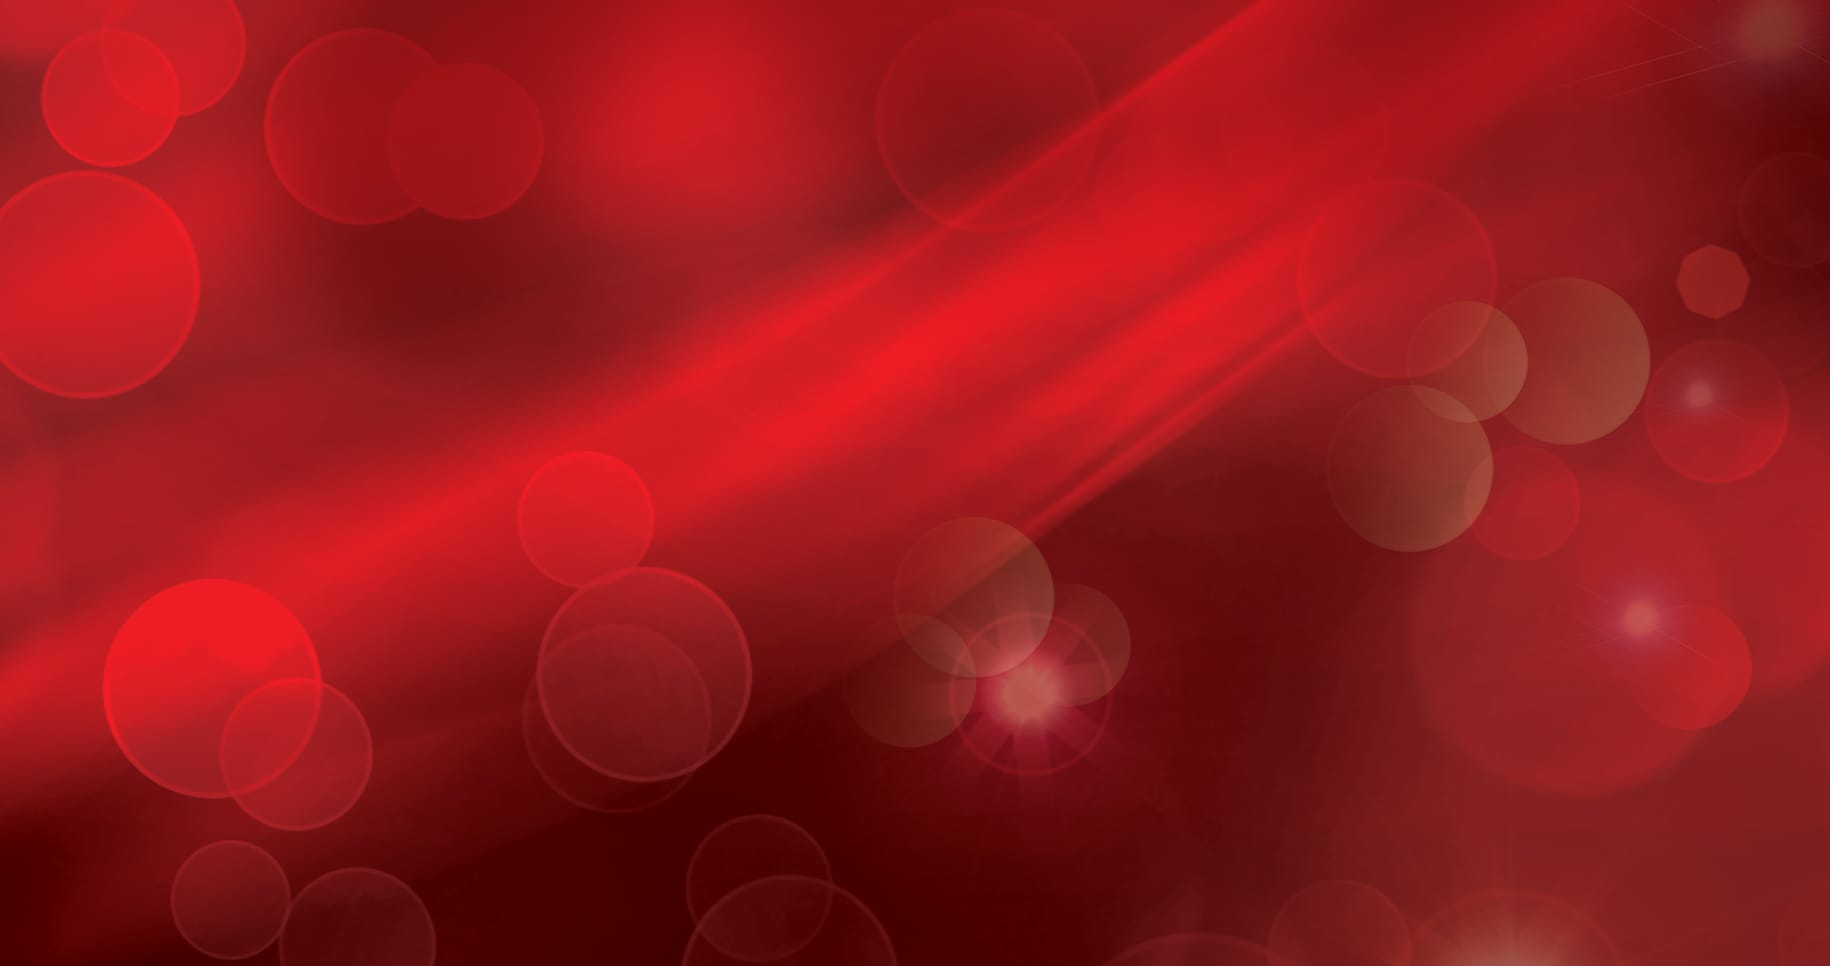 abstract red image with circles